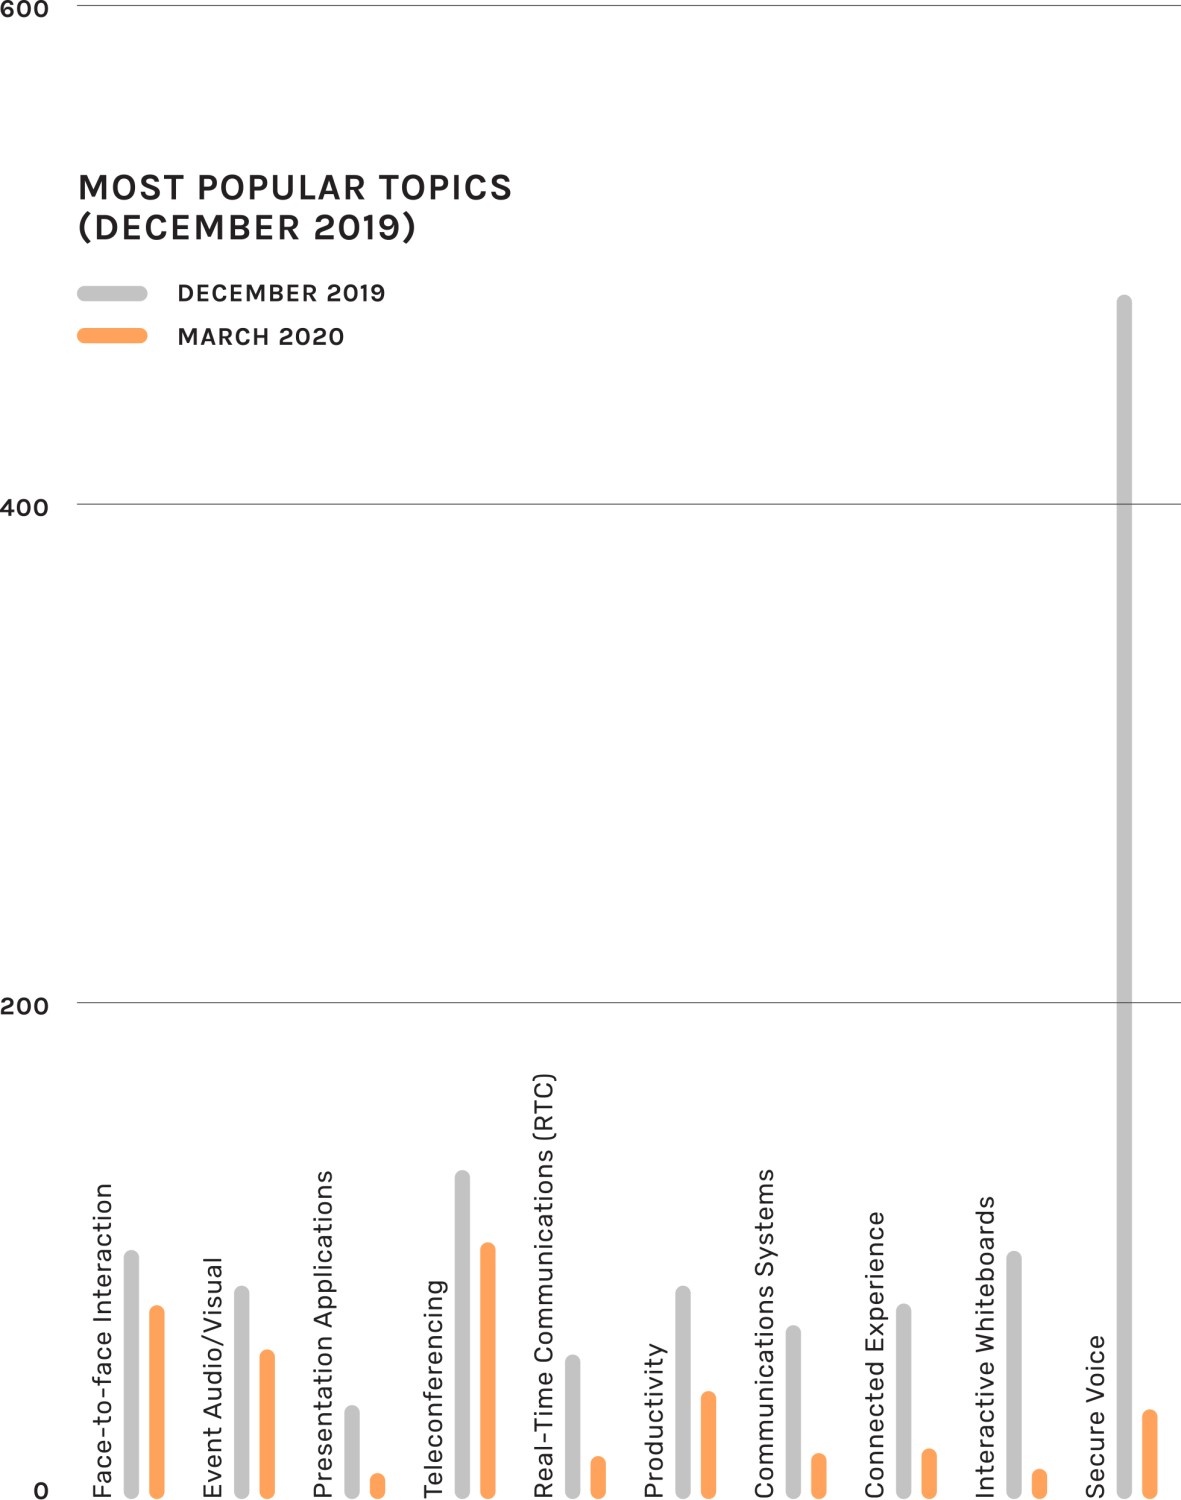 Most popular topics graph for December 2019